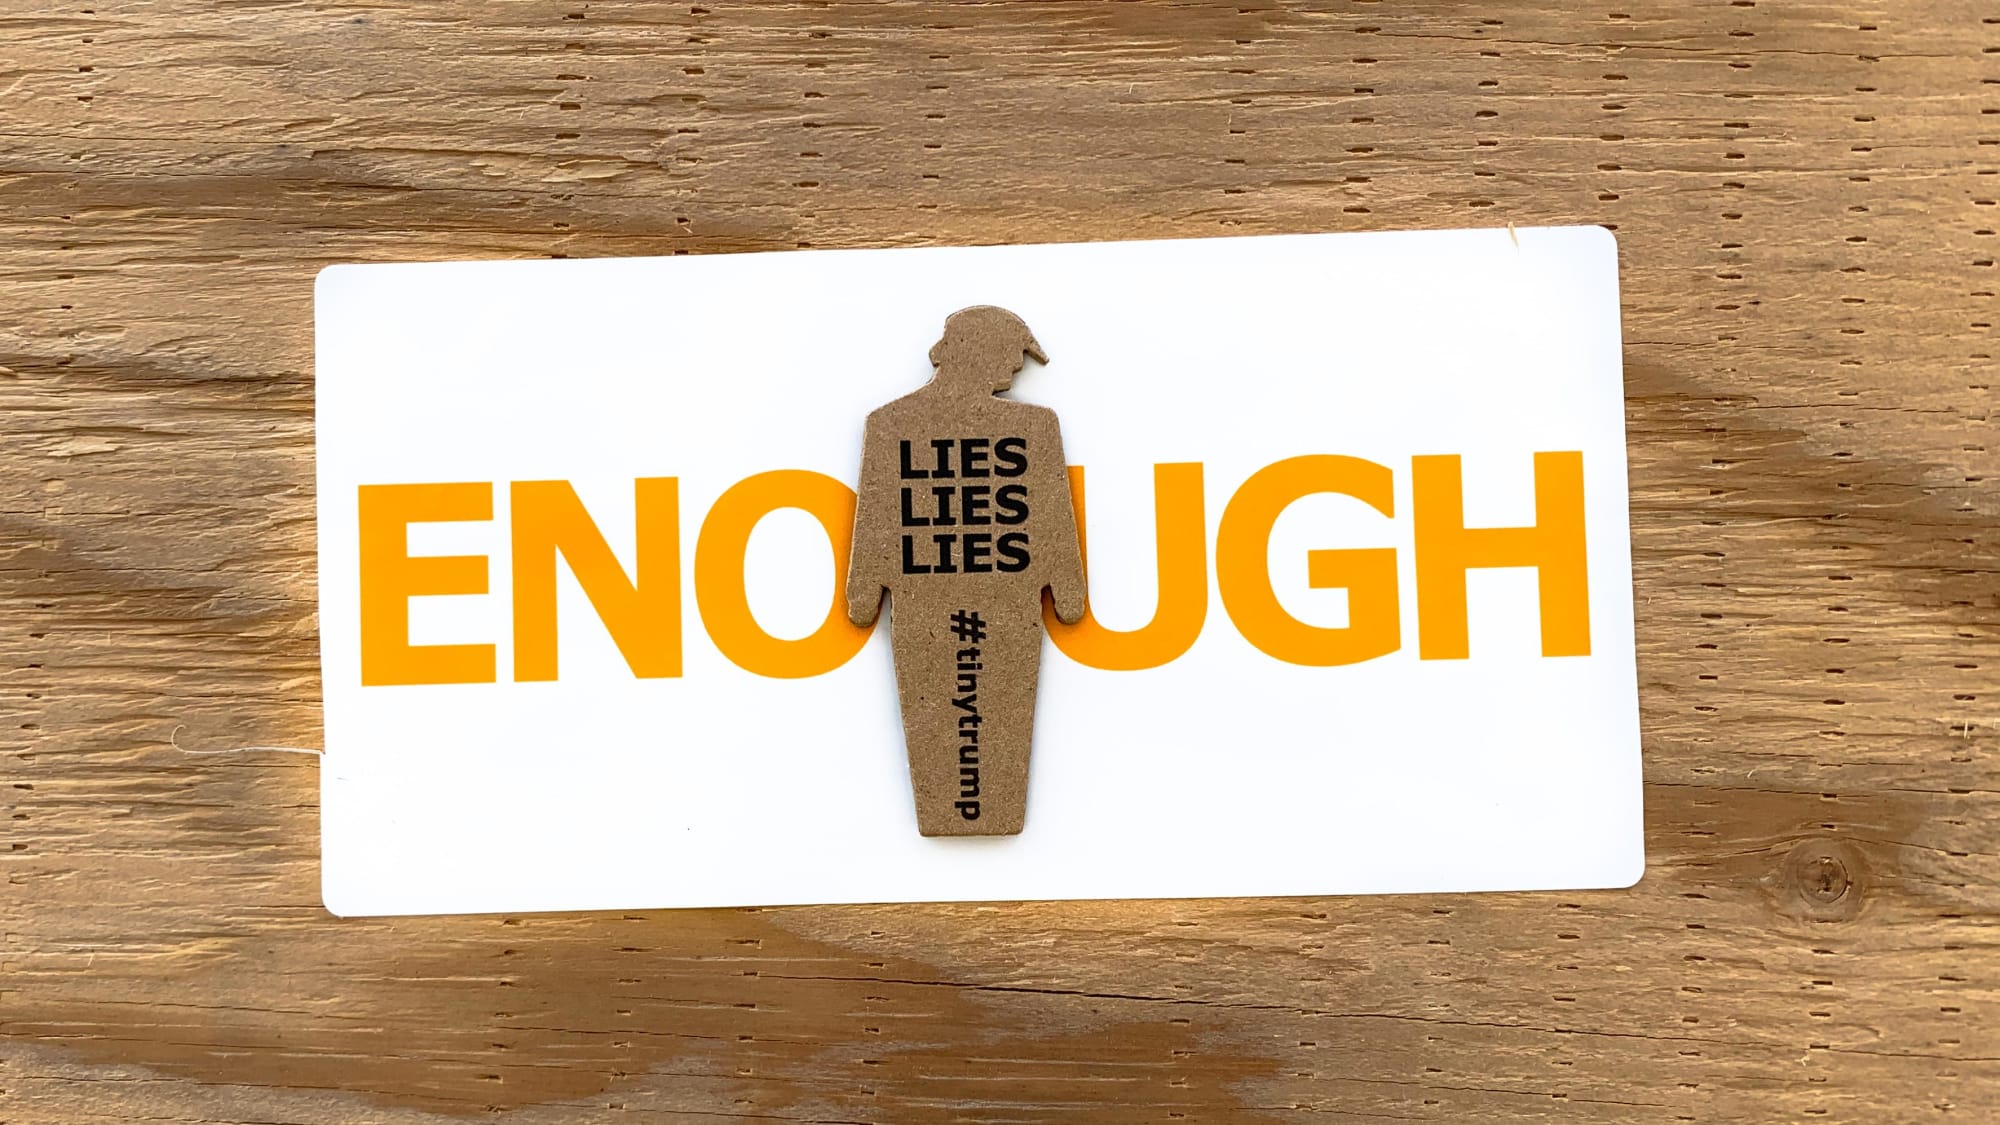 Photograph of a tiny trump with the slogan Lies Lies Lies stuck in the middle of a white bumper sticker with large orange type that says ENOUGH in all caps